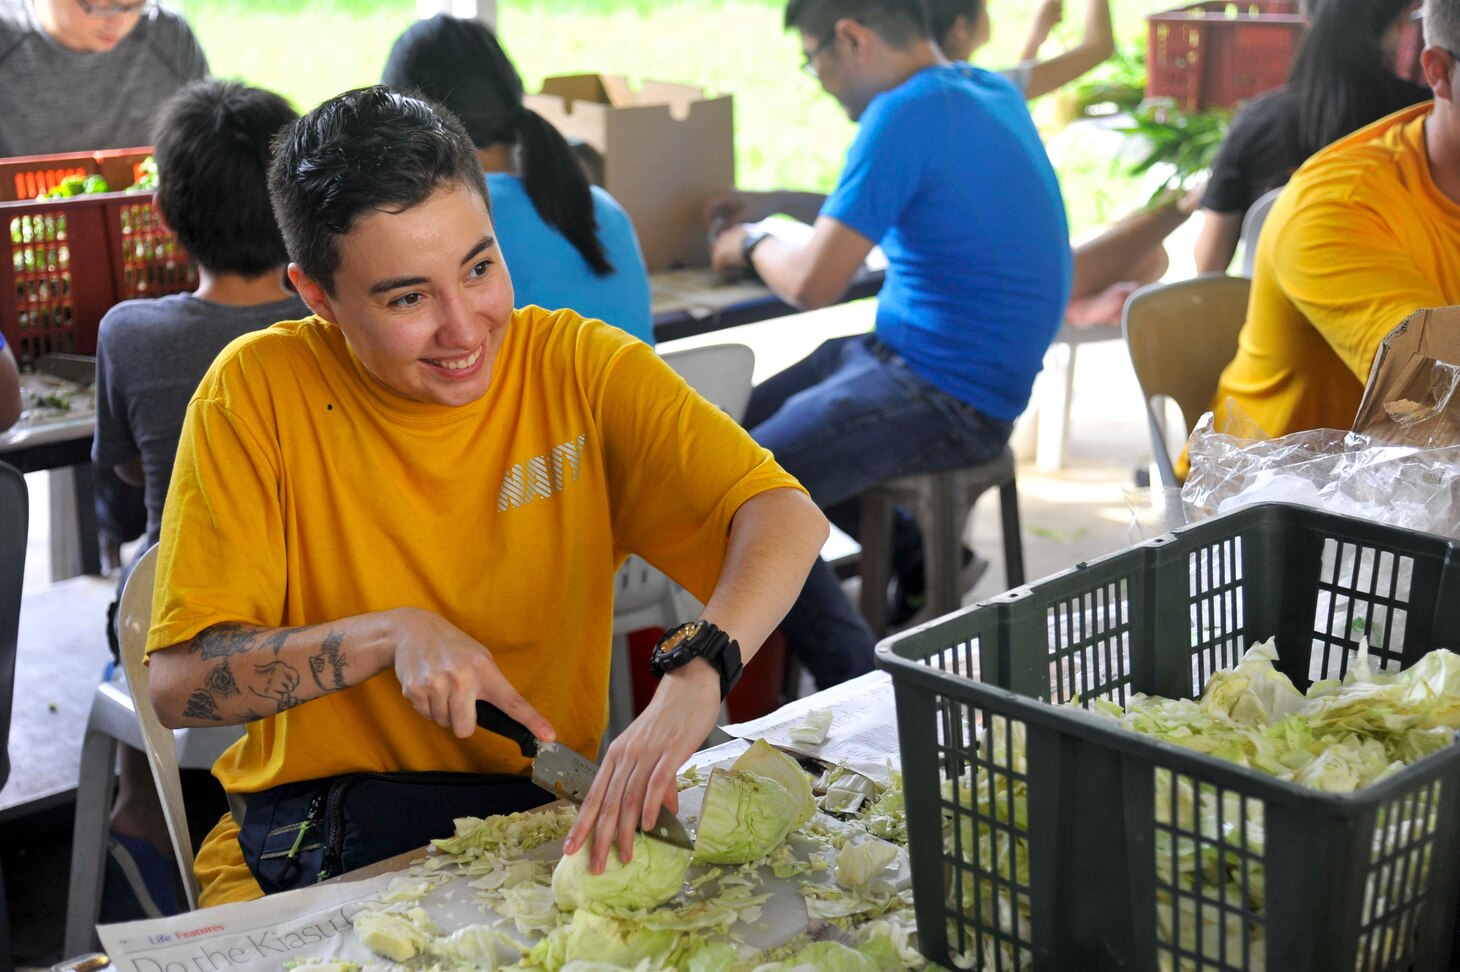 SINGAPORE (Dec. 20, 2018) – Machinery Repairman 3rd Class Alexis Rosales, a Sailor assigned to the submarine tender USS Emory S. Land (AS 39), prepares cabbage during a community service event at the Willing Hearts Soup Kitchen in Singapore, Dec. 20. Emory S. Land is a forward-deployed expeditionary submarine tender on an extended deployment conducting coordinated tended moorings and afloat maintenance in the U.S. 5th and 7th Fleet areas of operations.